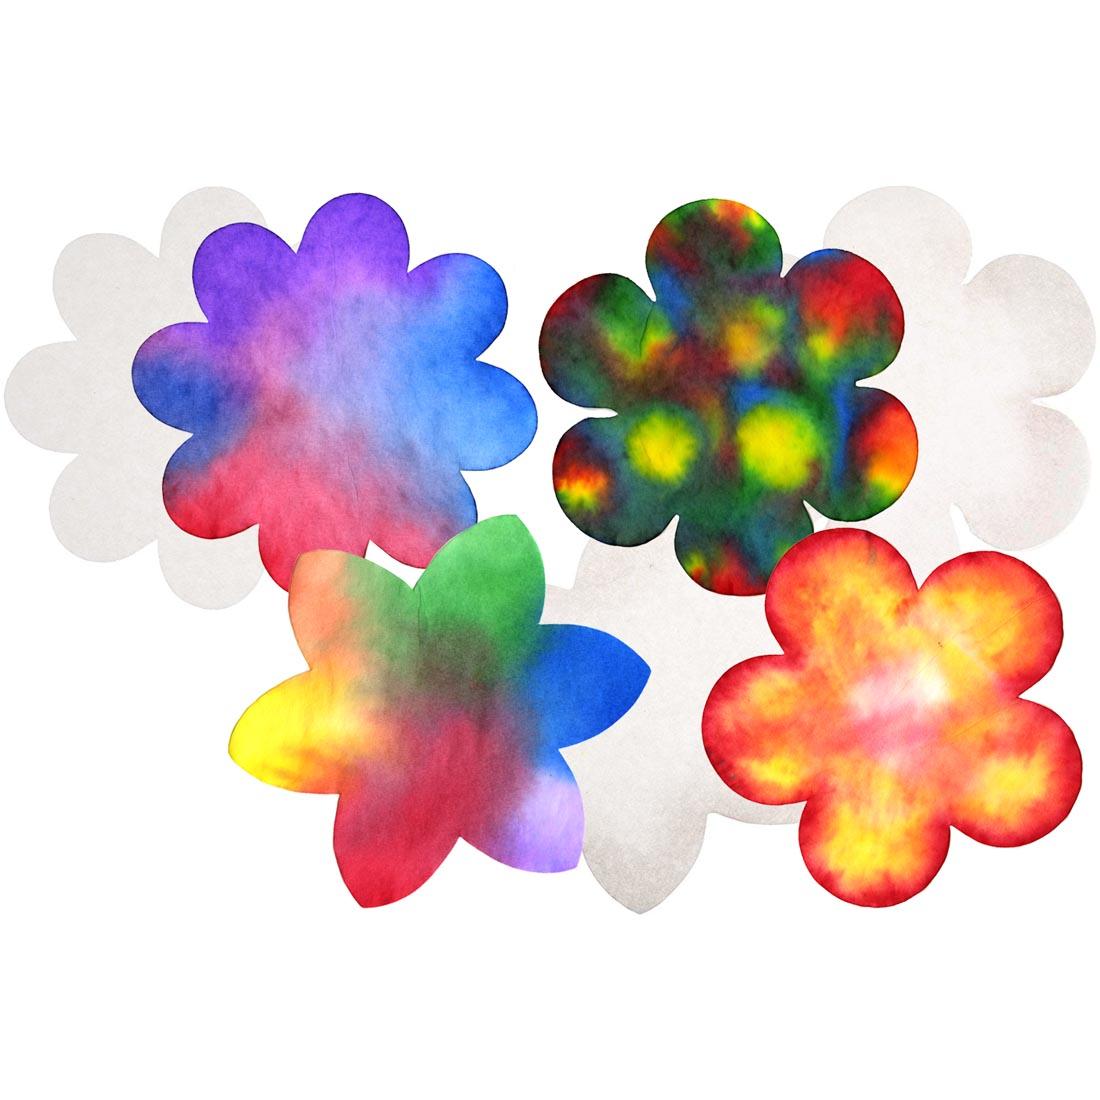 Blank Roylco Color Diffusing Paper Flowers with colorful examples of painted flowers